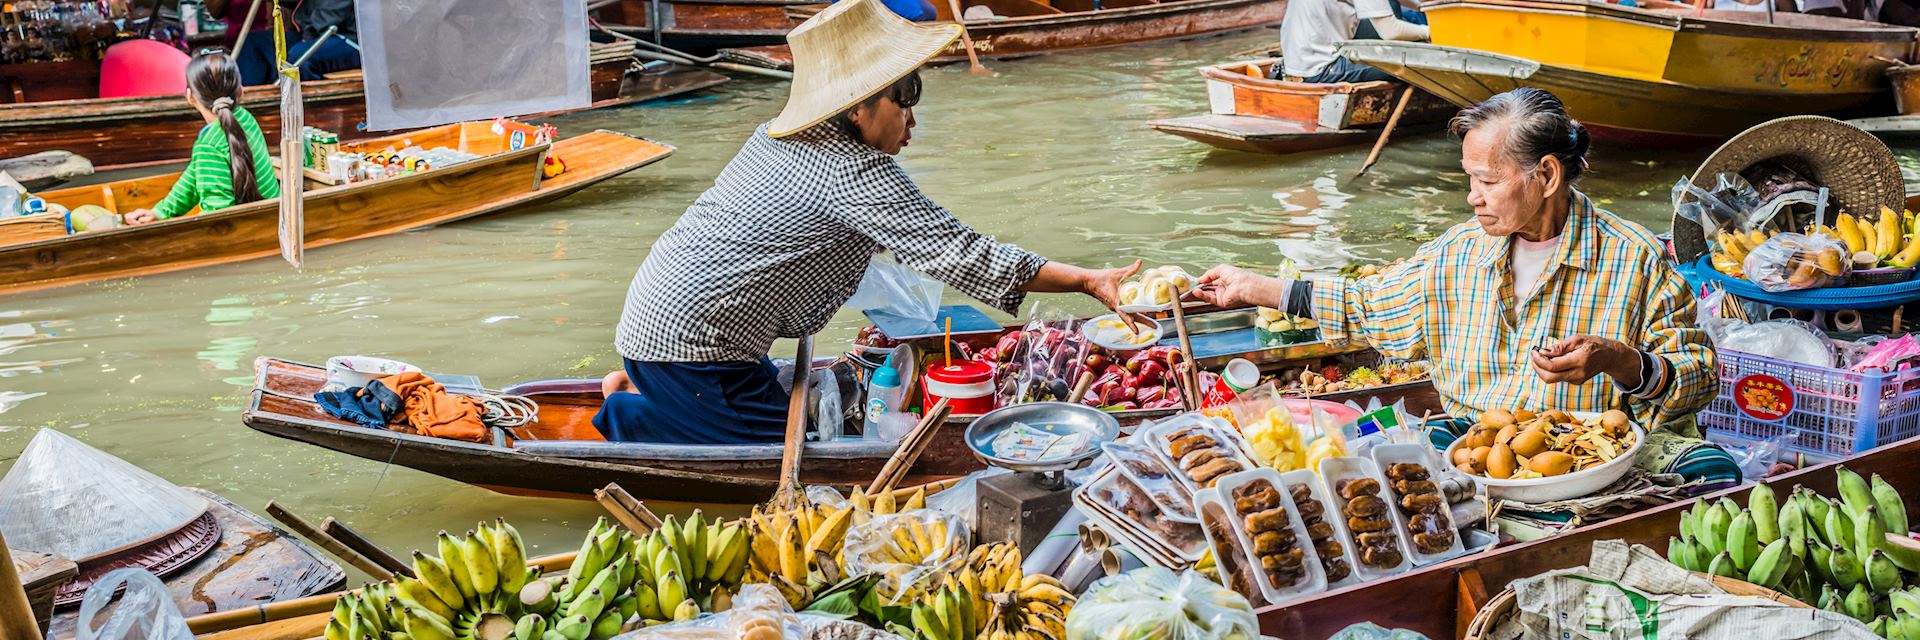 Floating market in Amphawa